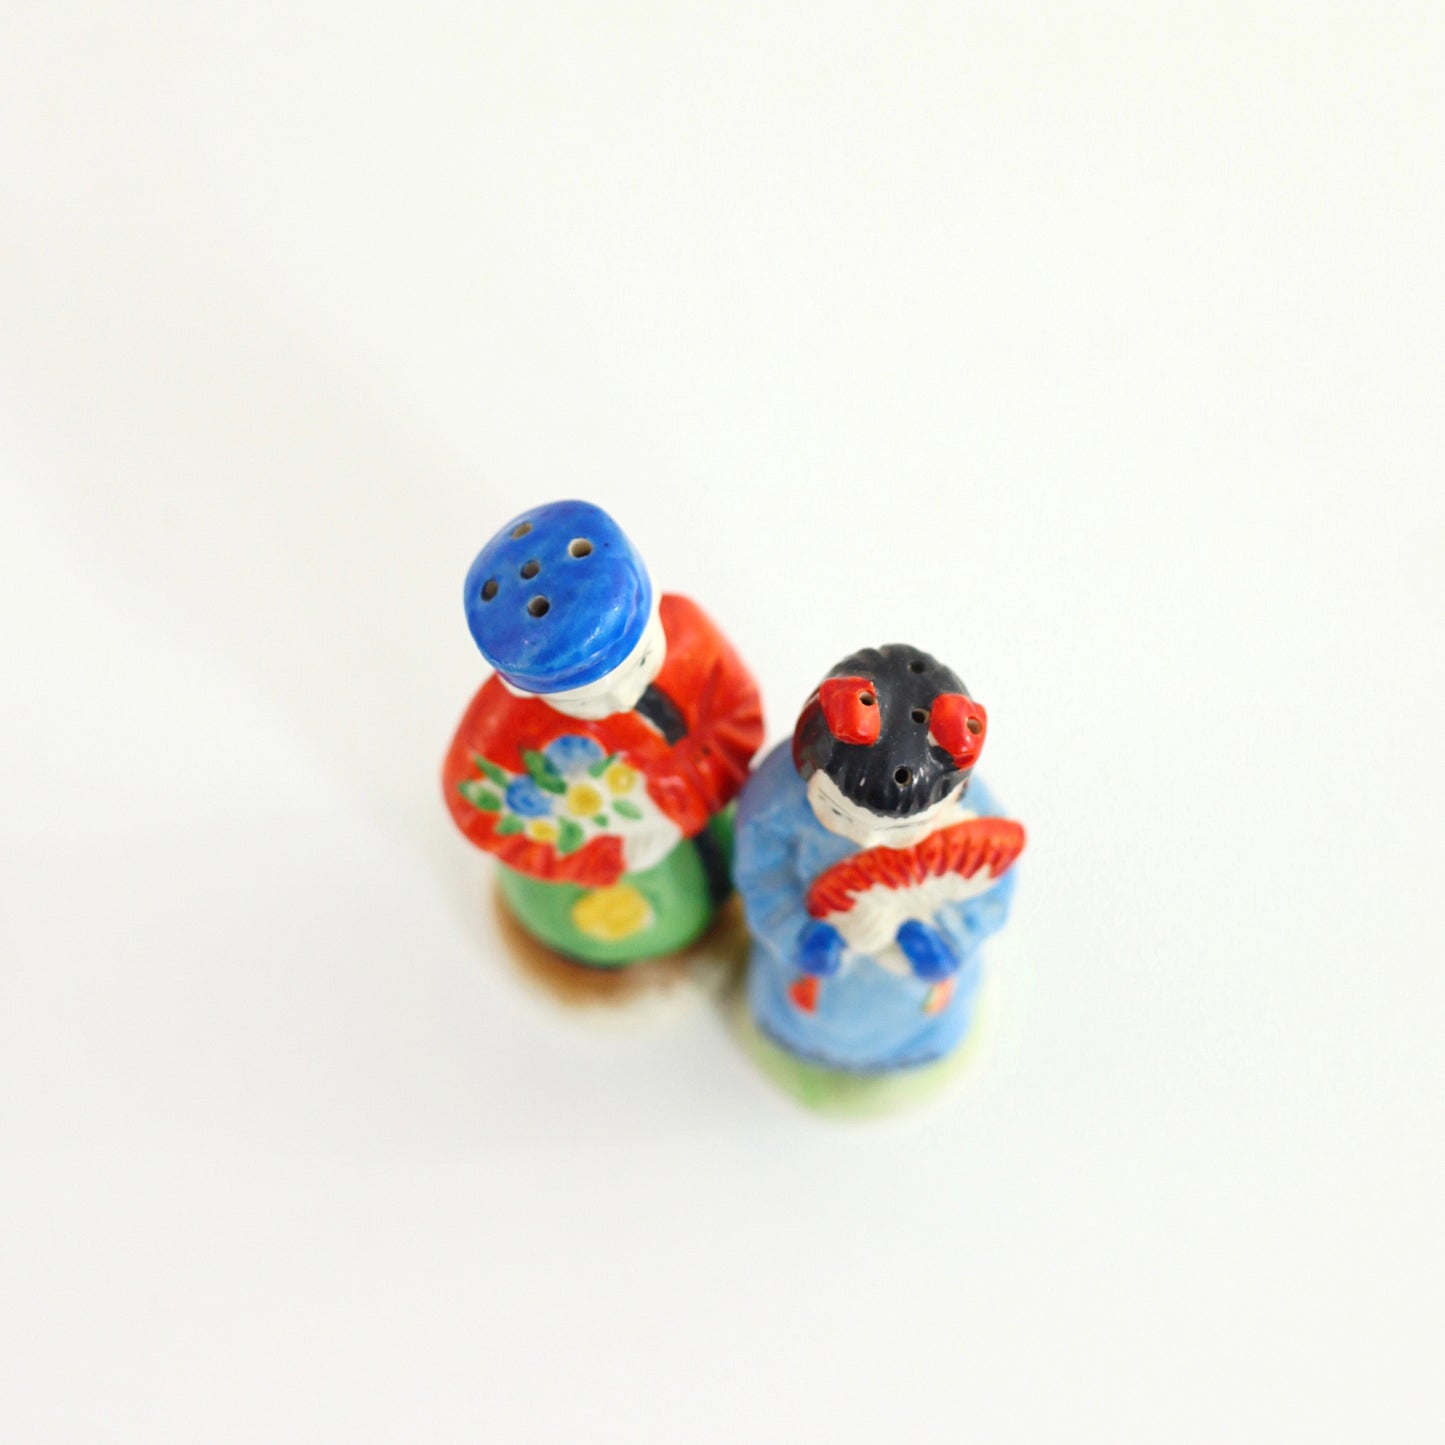 SOLD - Vintage Asian Man and Woman Salt and Pepper Shakers from Japan